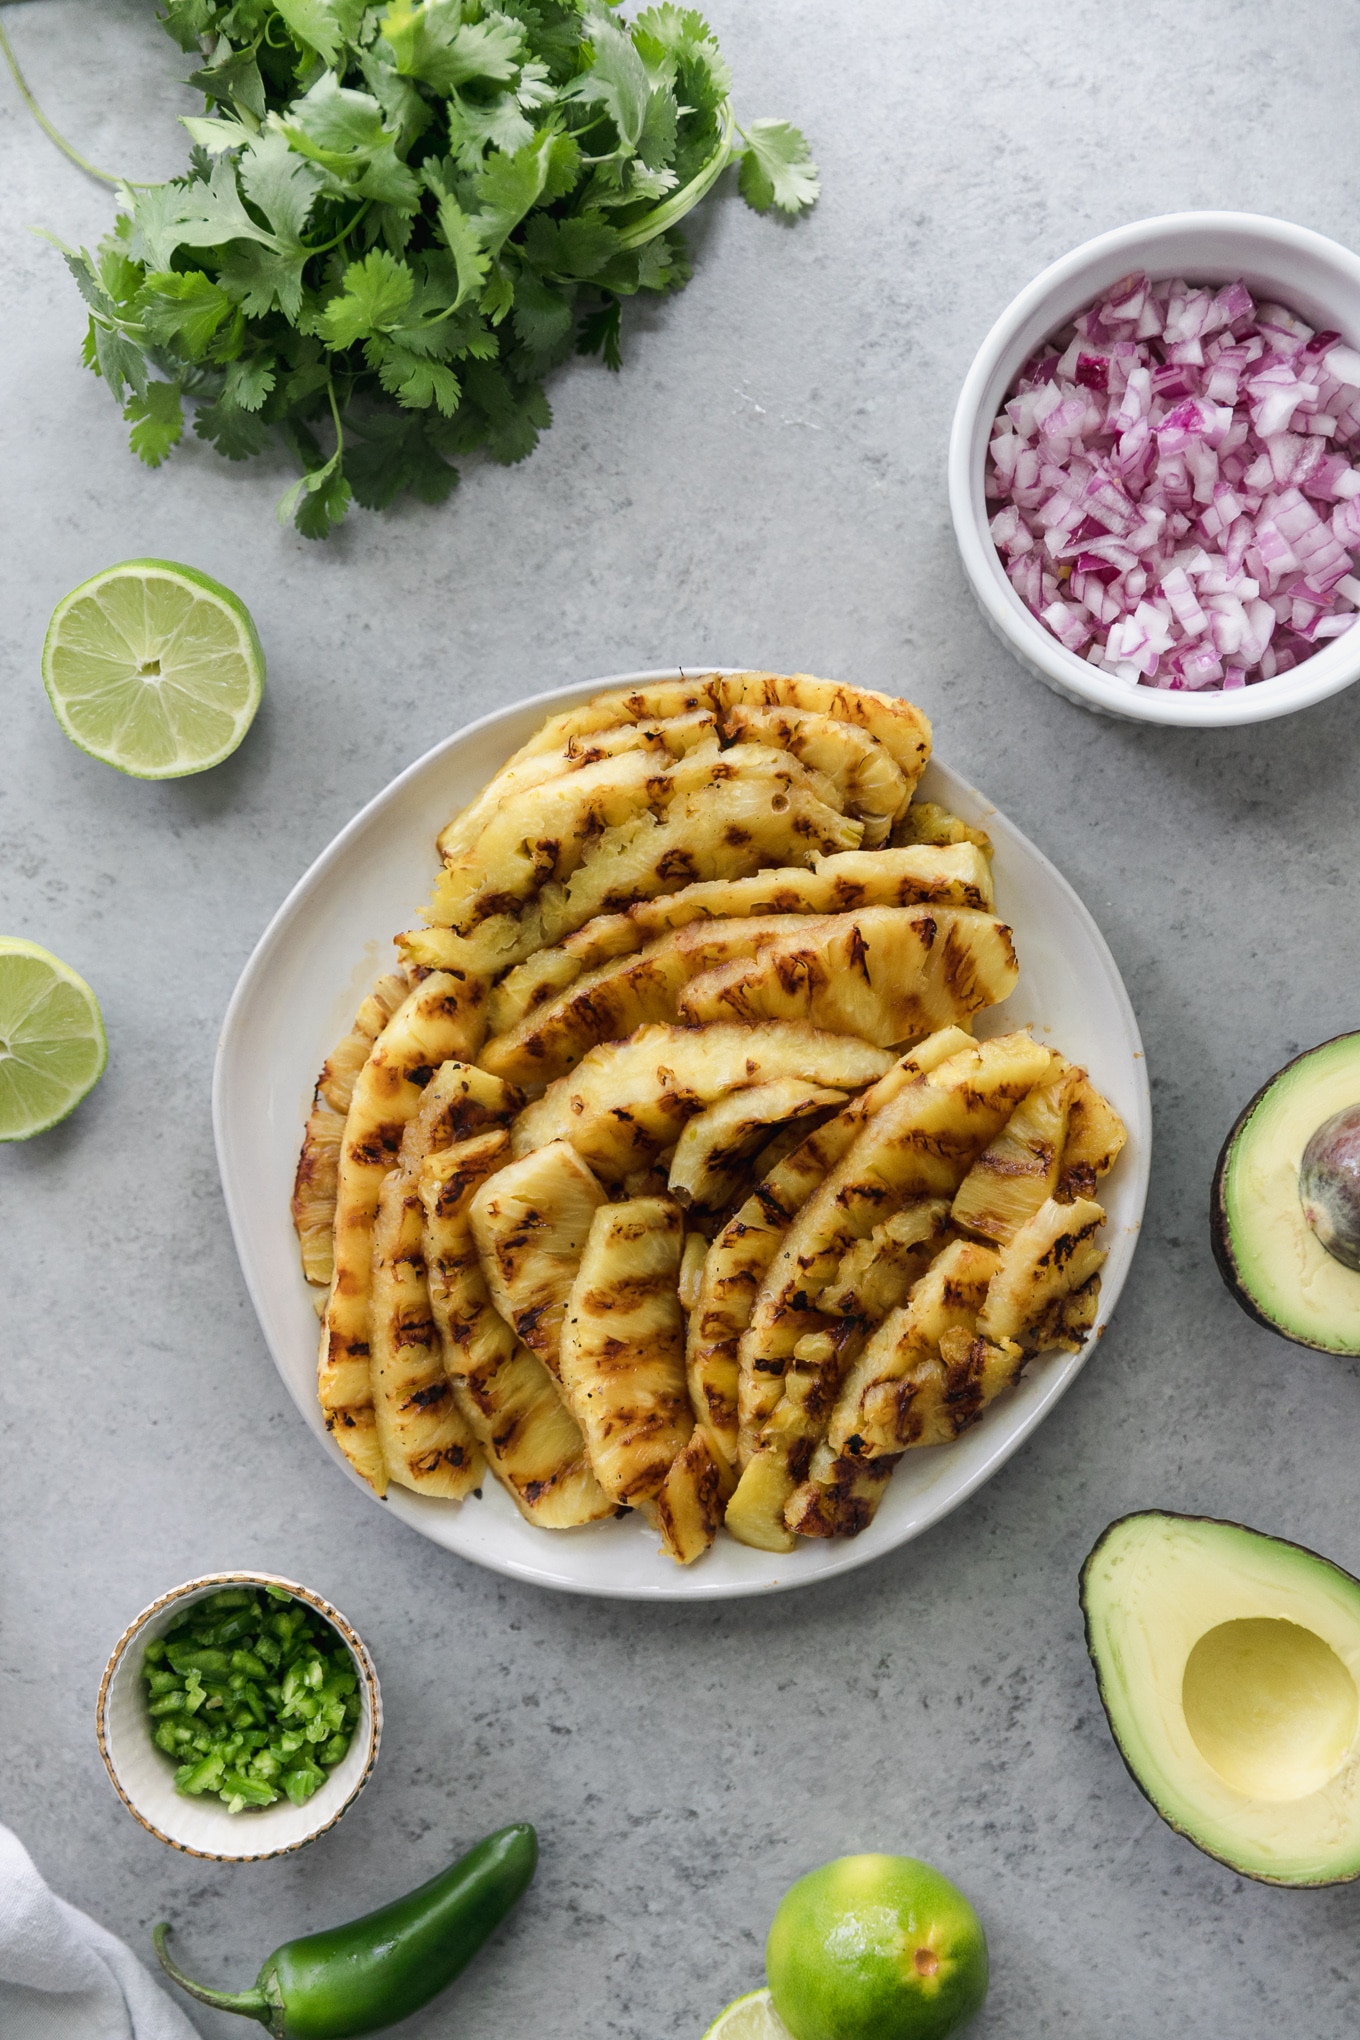 Over head shot of a plate of grilled pineapple spears, surrounded by a halved avocado, a bowl of chopped jalapeño, a bunch of cilantro, and a bowl of diced red onion